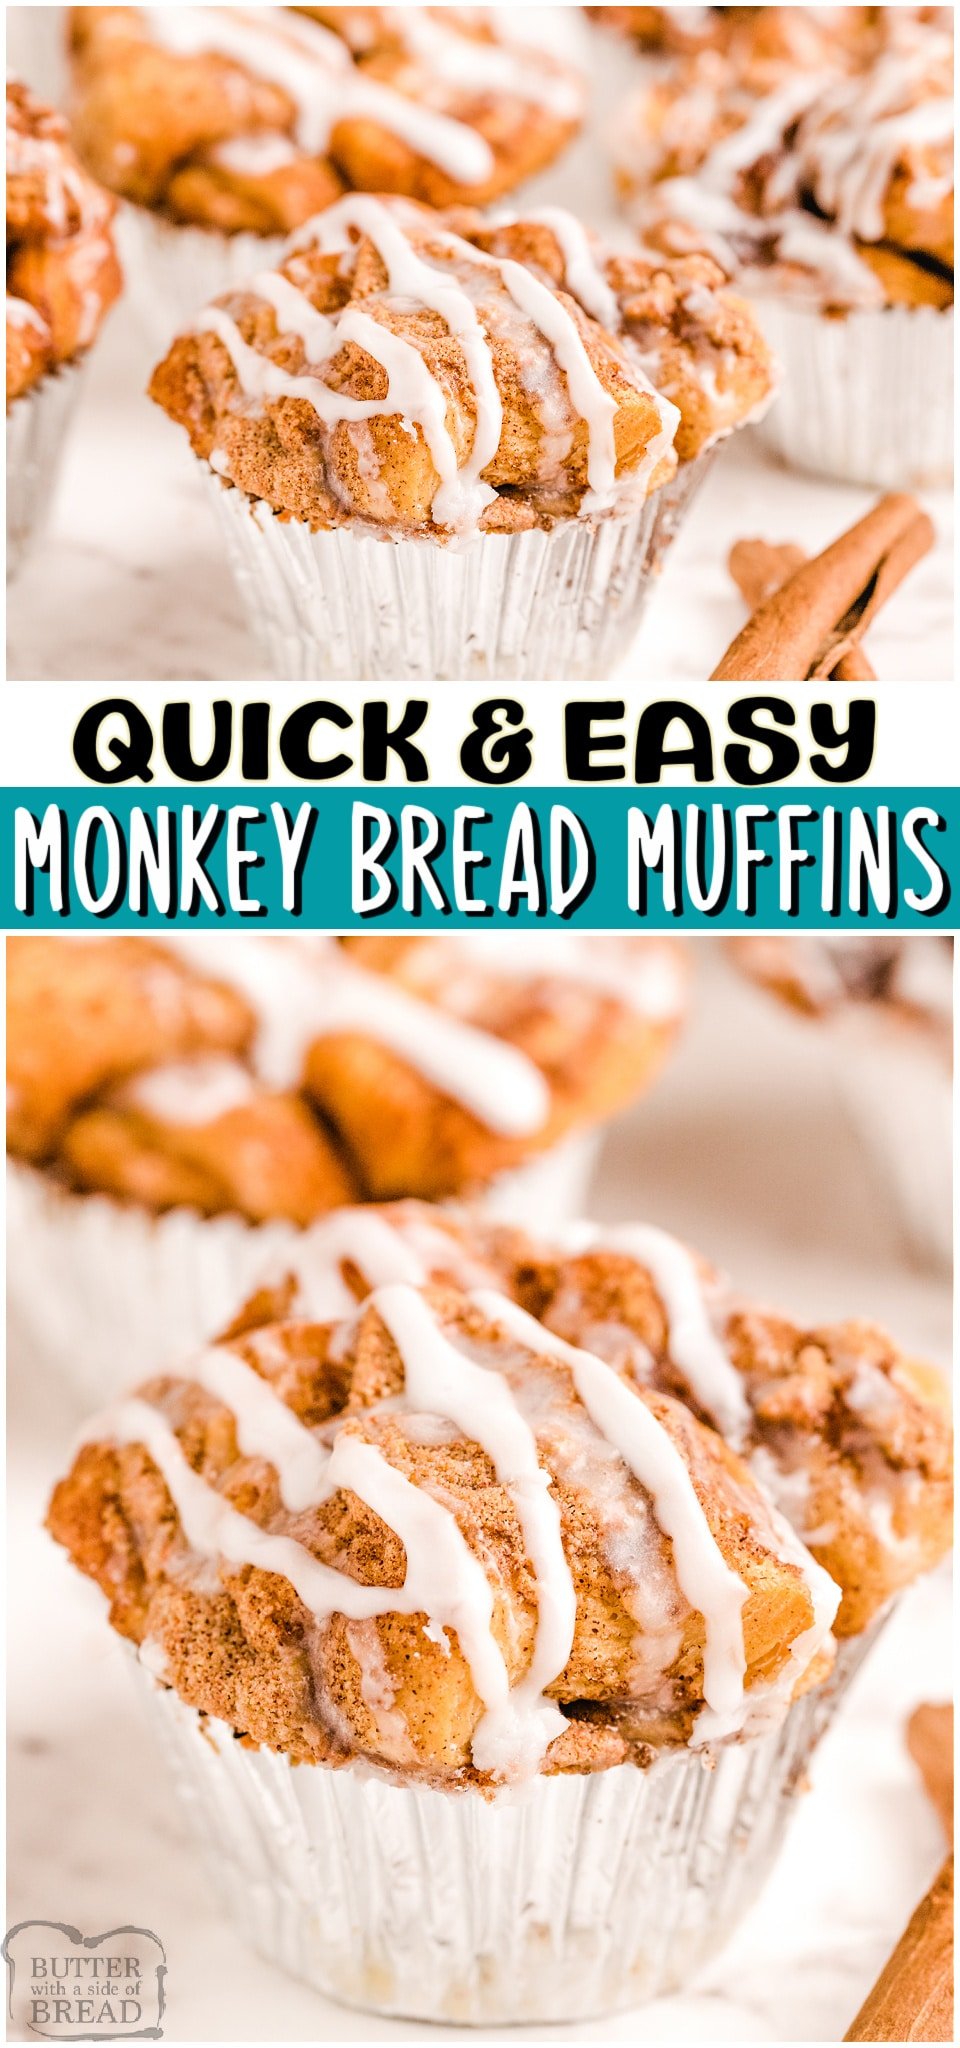 Monkey Bread Muffins made with just a handful of ingredients & ready in 30 minutes! All the buttery sweet butterscotch & cinnamon flavors of Monkey Bread, only in muffin form! #monkeybread #muffins #cinnamon #baking #breakfast #easyrecipe from BUTTER WITH A SIDE OF BREAD